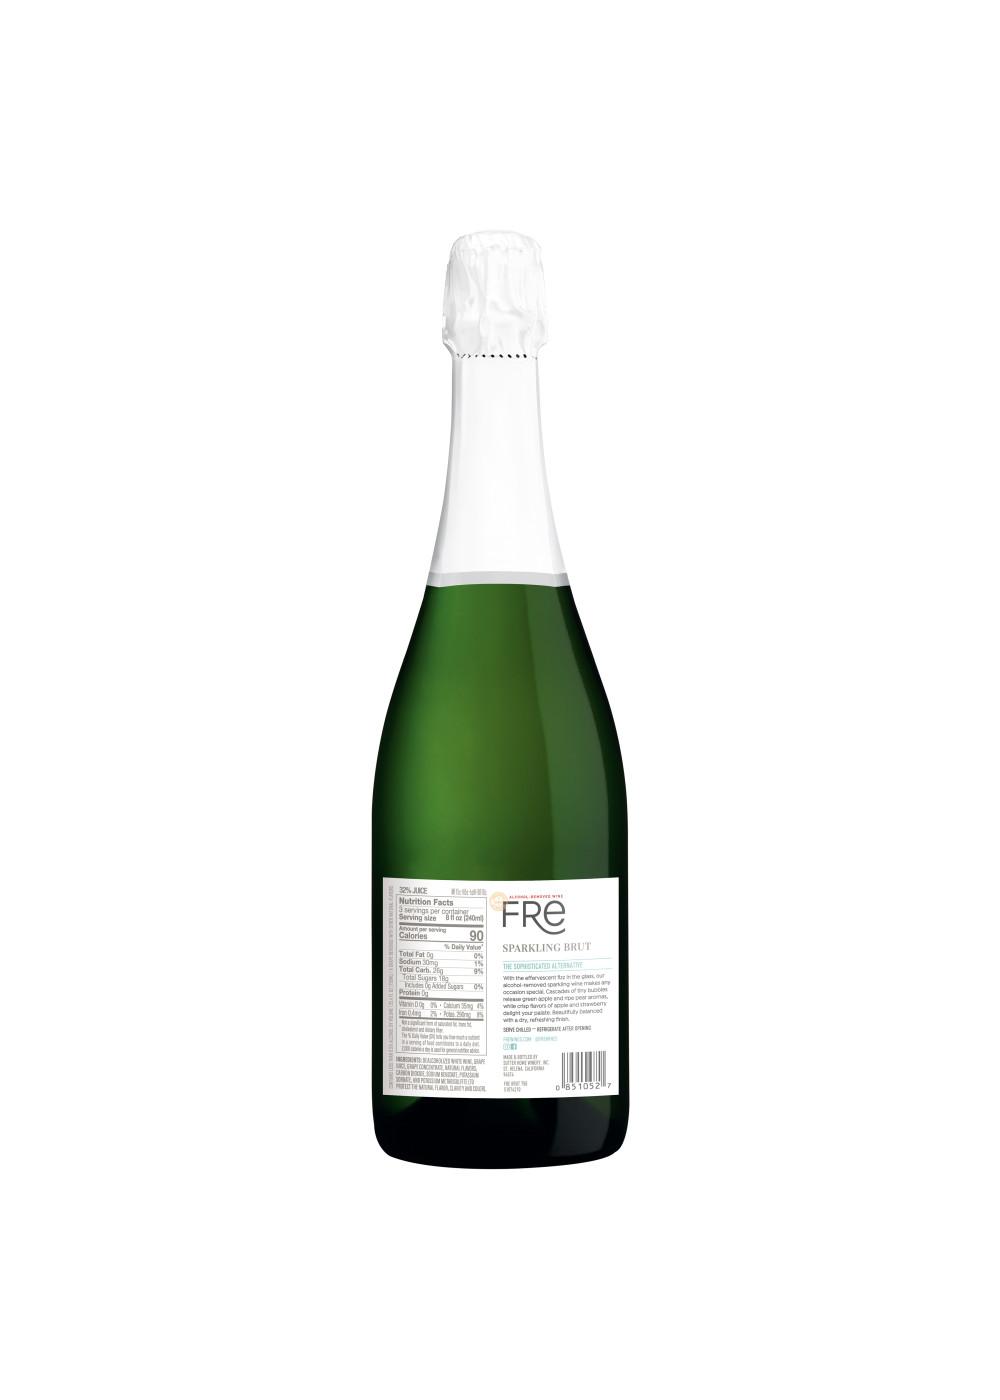 Sutter Home Family Vineyards Fre Alcohol Removed Sparkling Brut; image 5 of 5